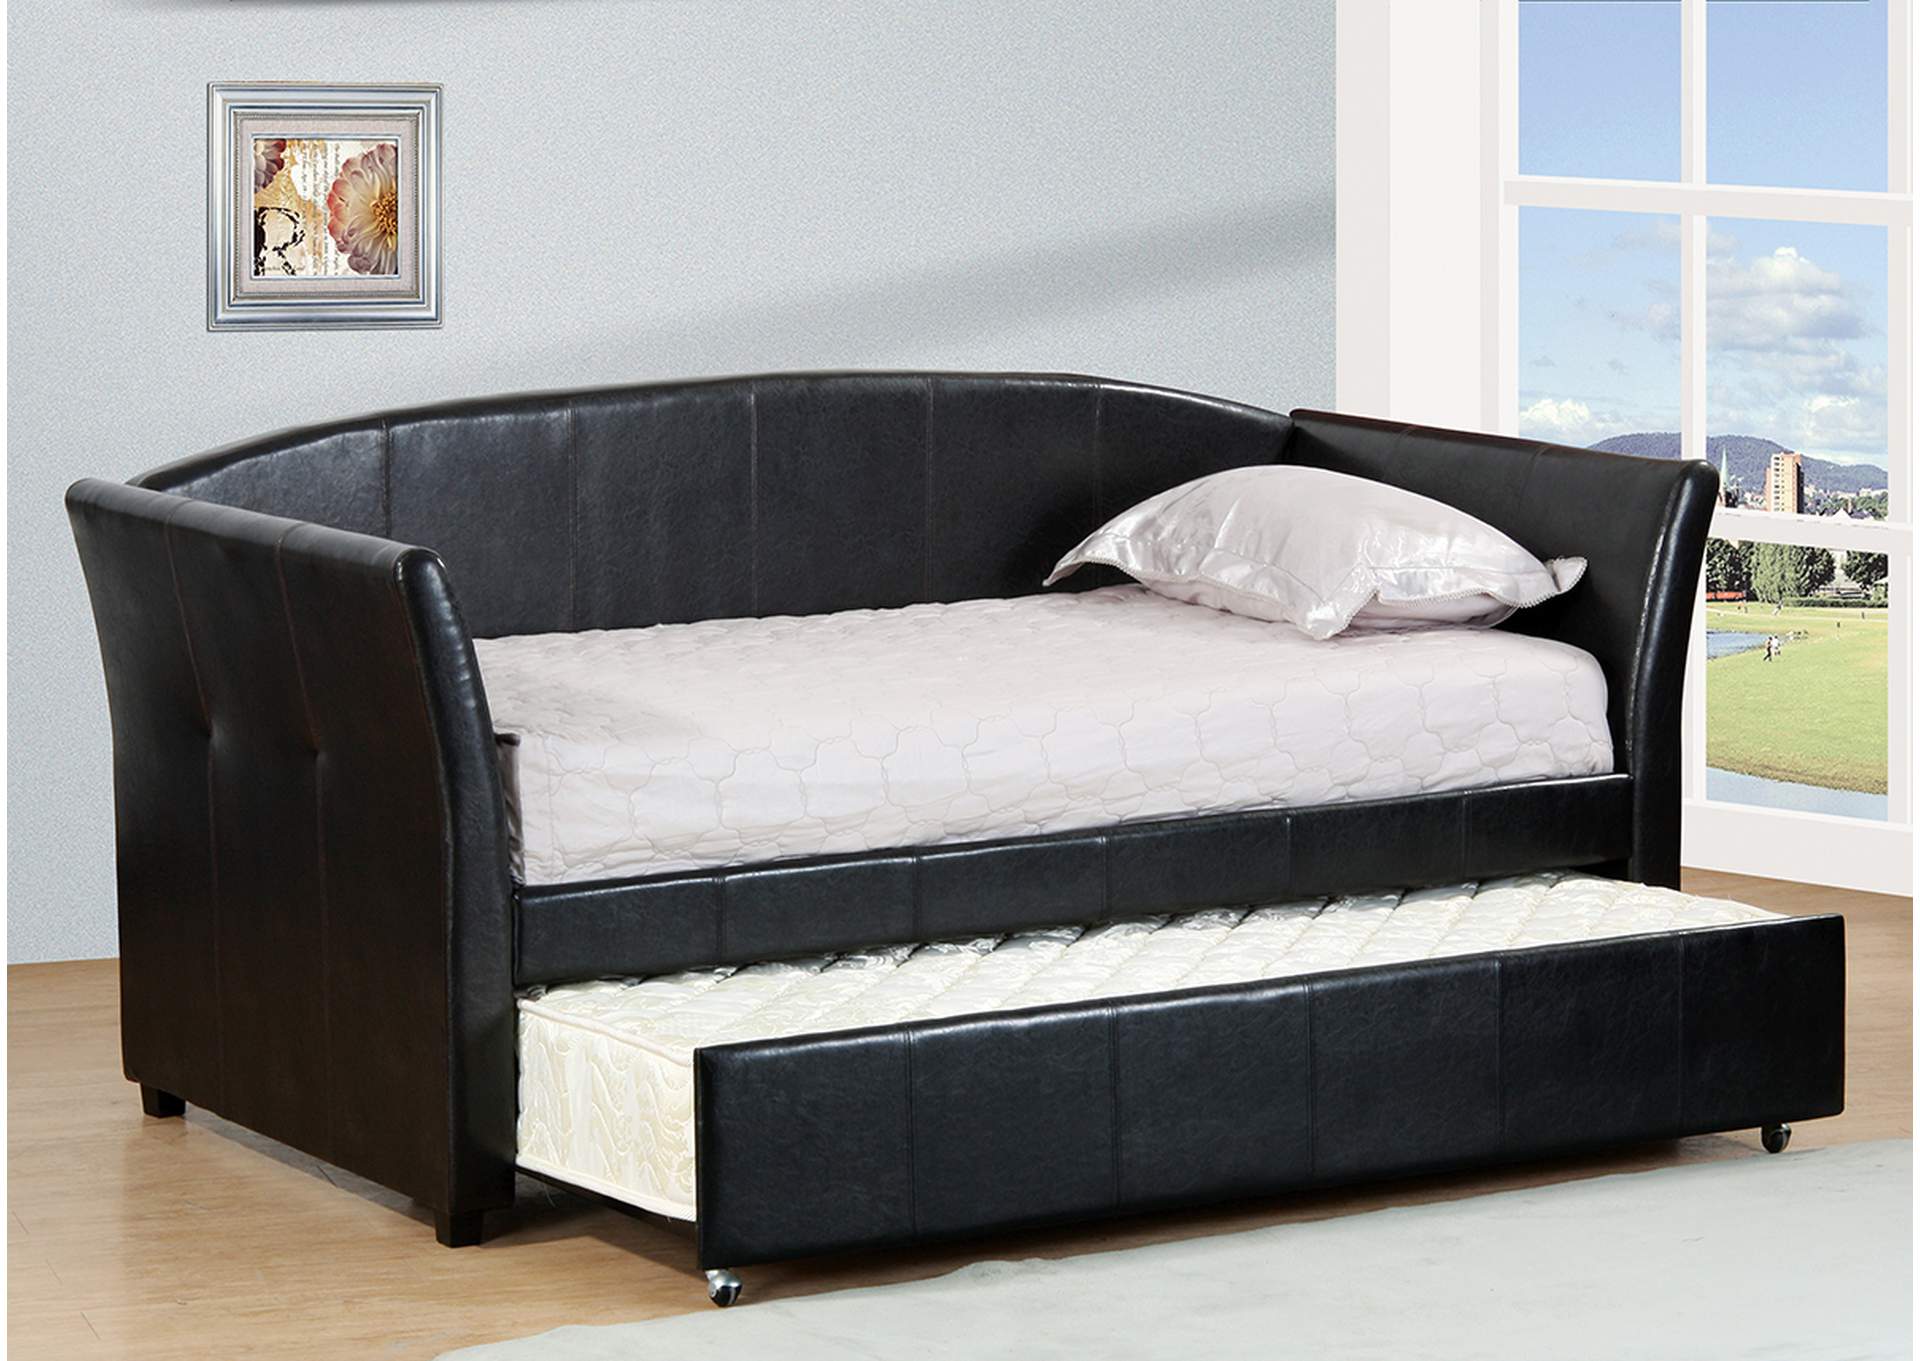 B902 Dark Brown Day Bed With Trundle,Nationwide